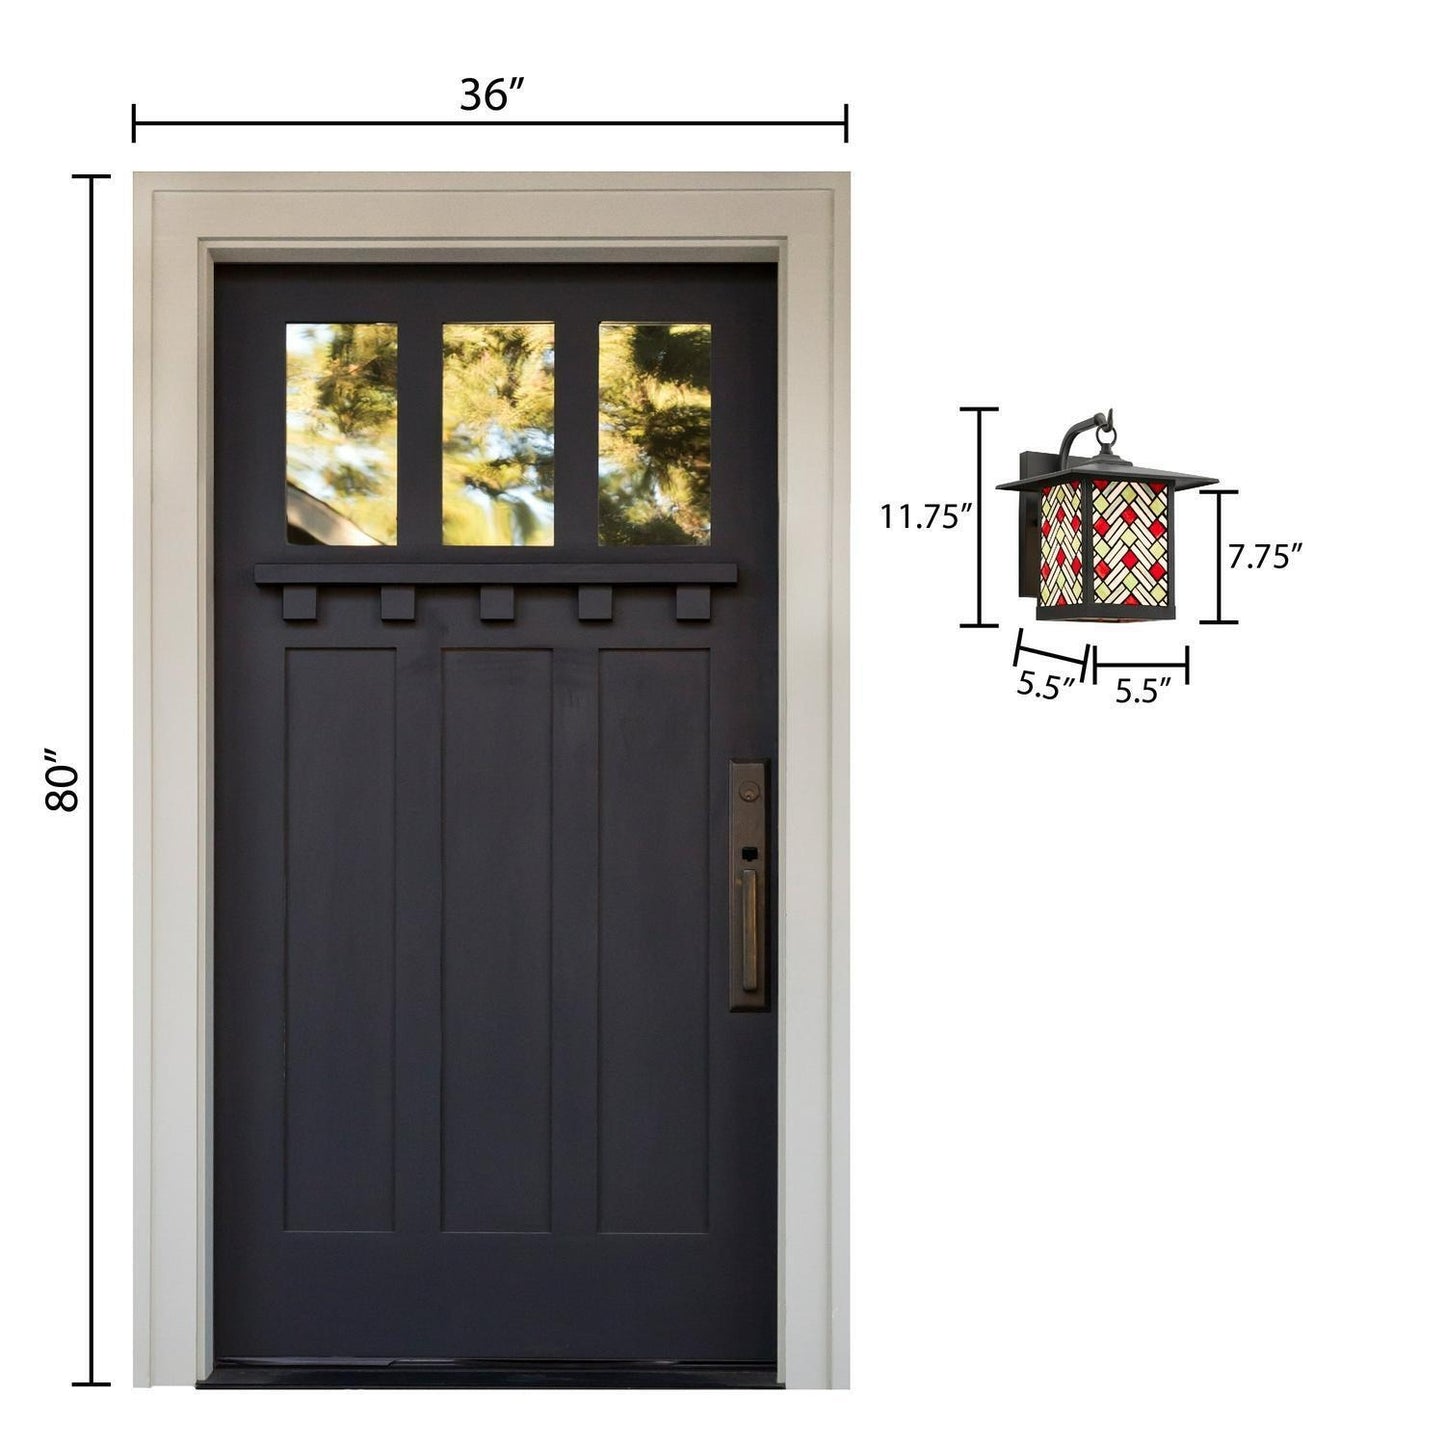 Oil Rubbed Bronze Outdoor Lantern Wall Sconce Multicolor Stained Glass